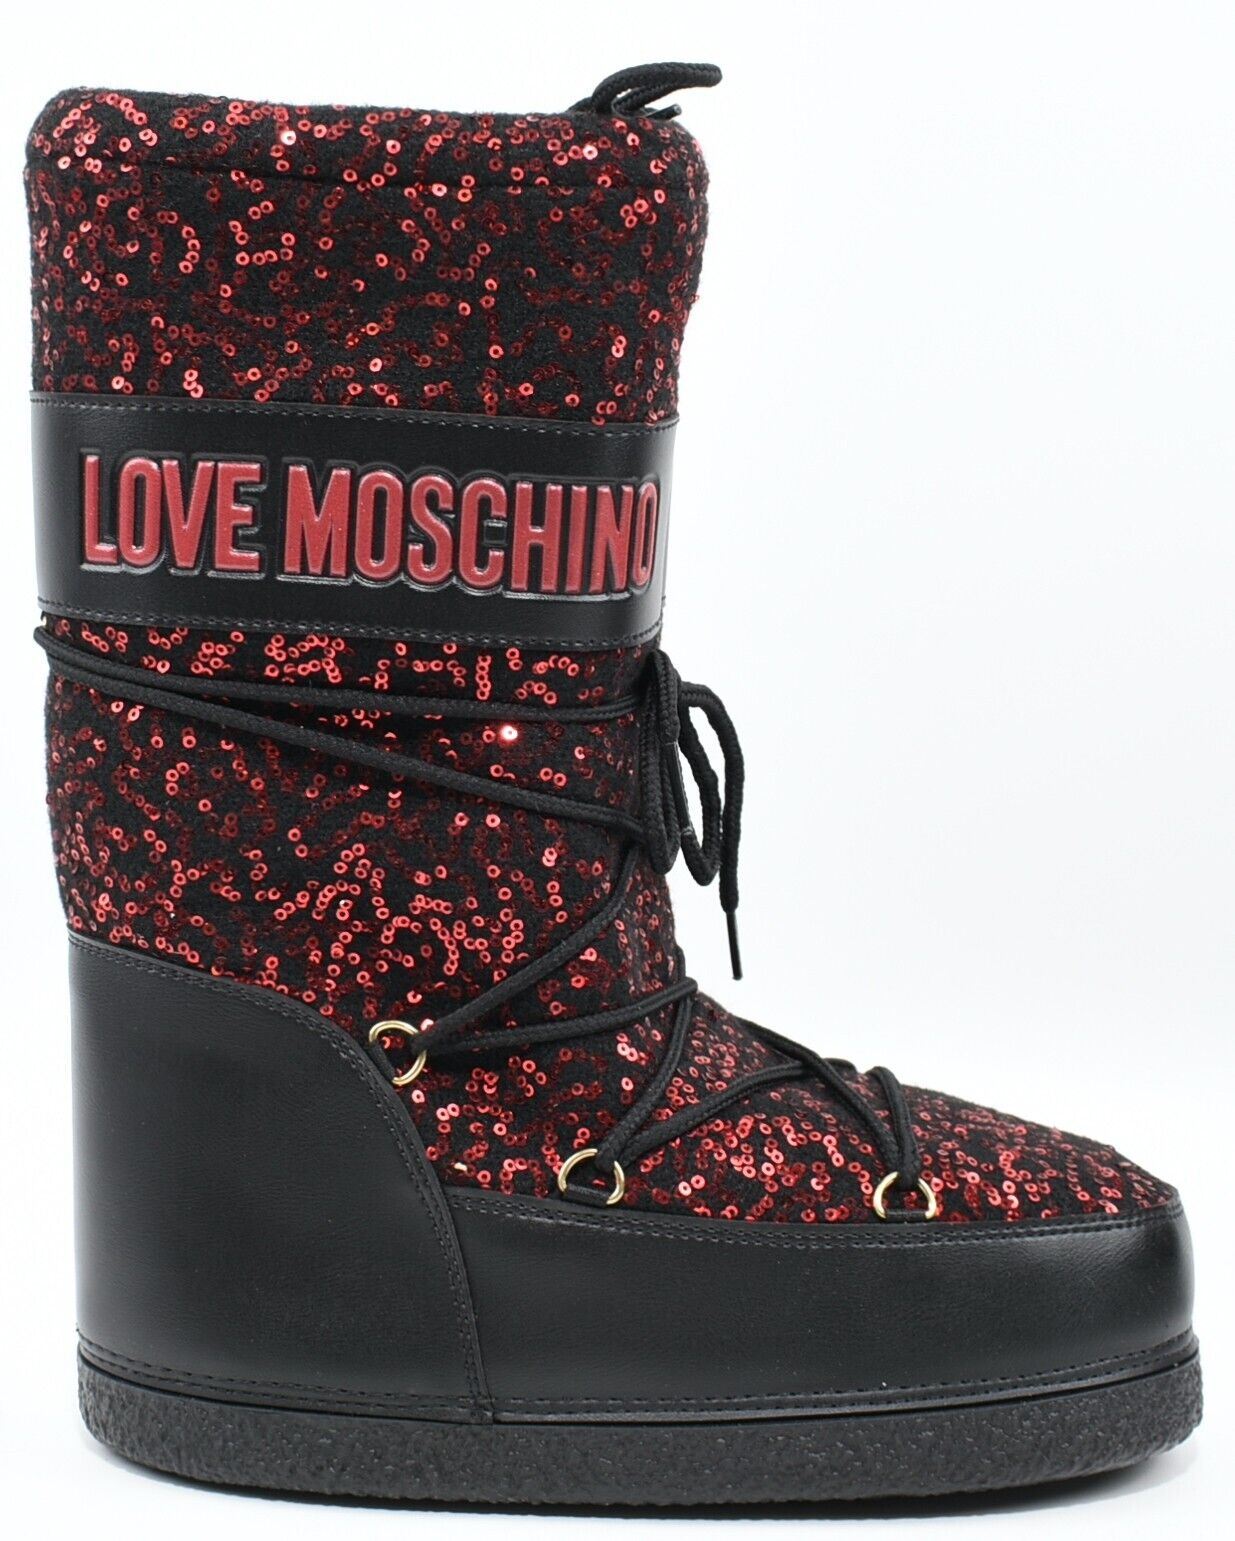 LOVE MOSCHINO - Womens Winter Snow Boots, Black/Red Sequins, size UK 6